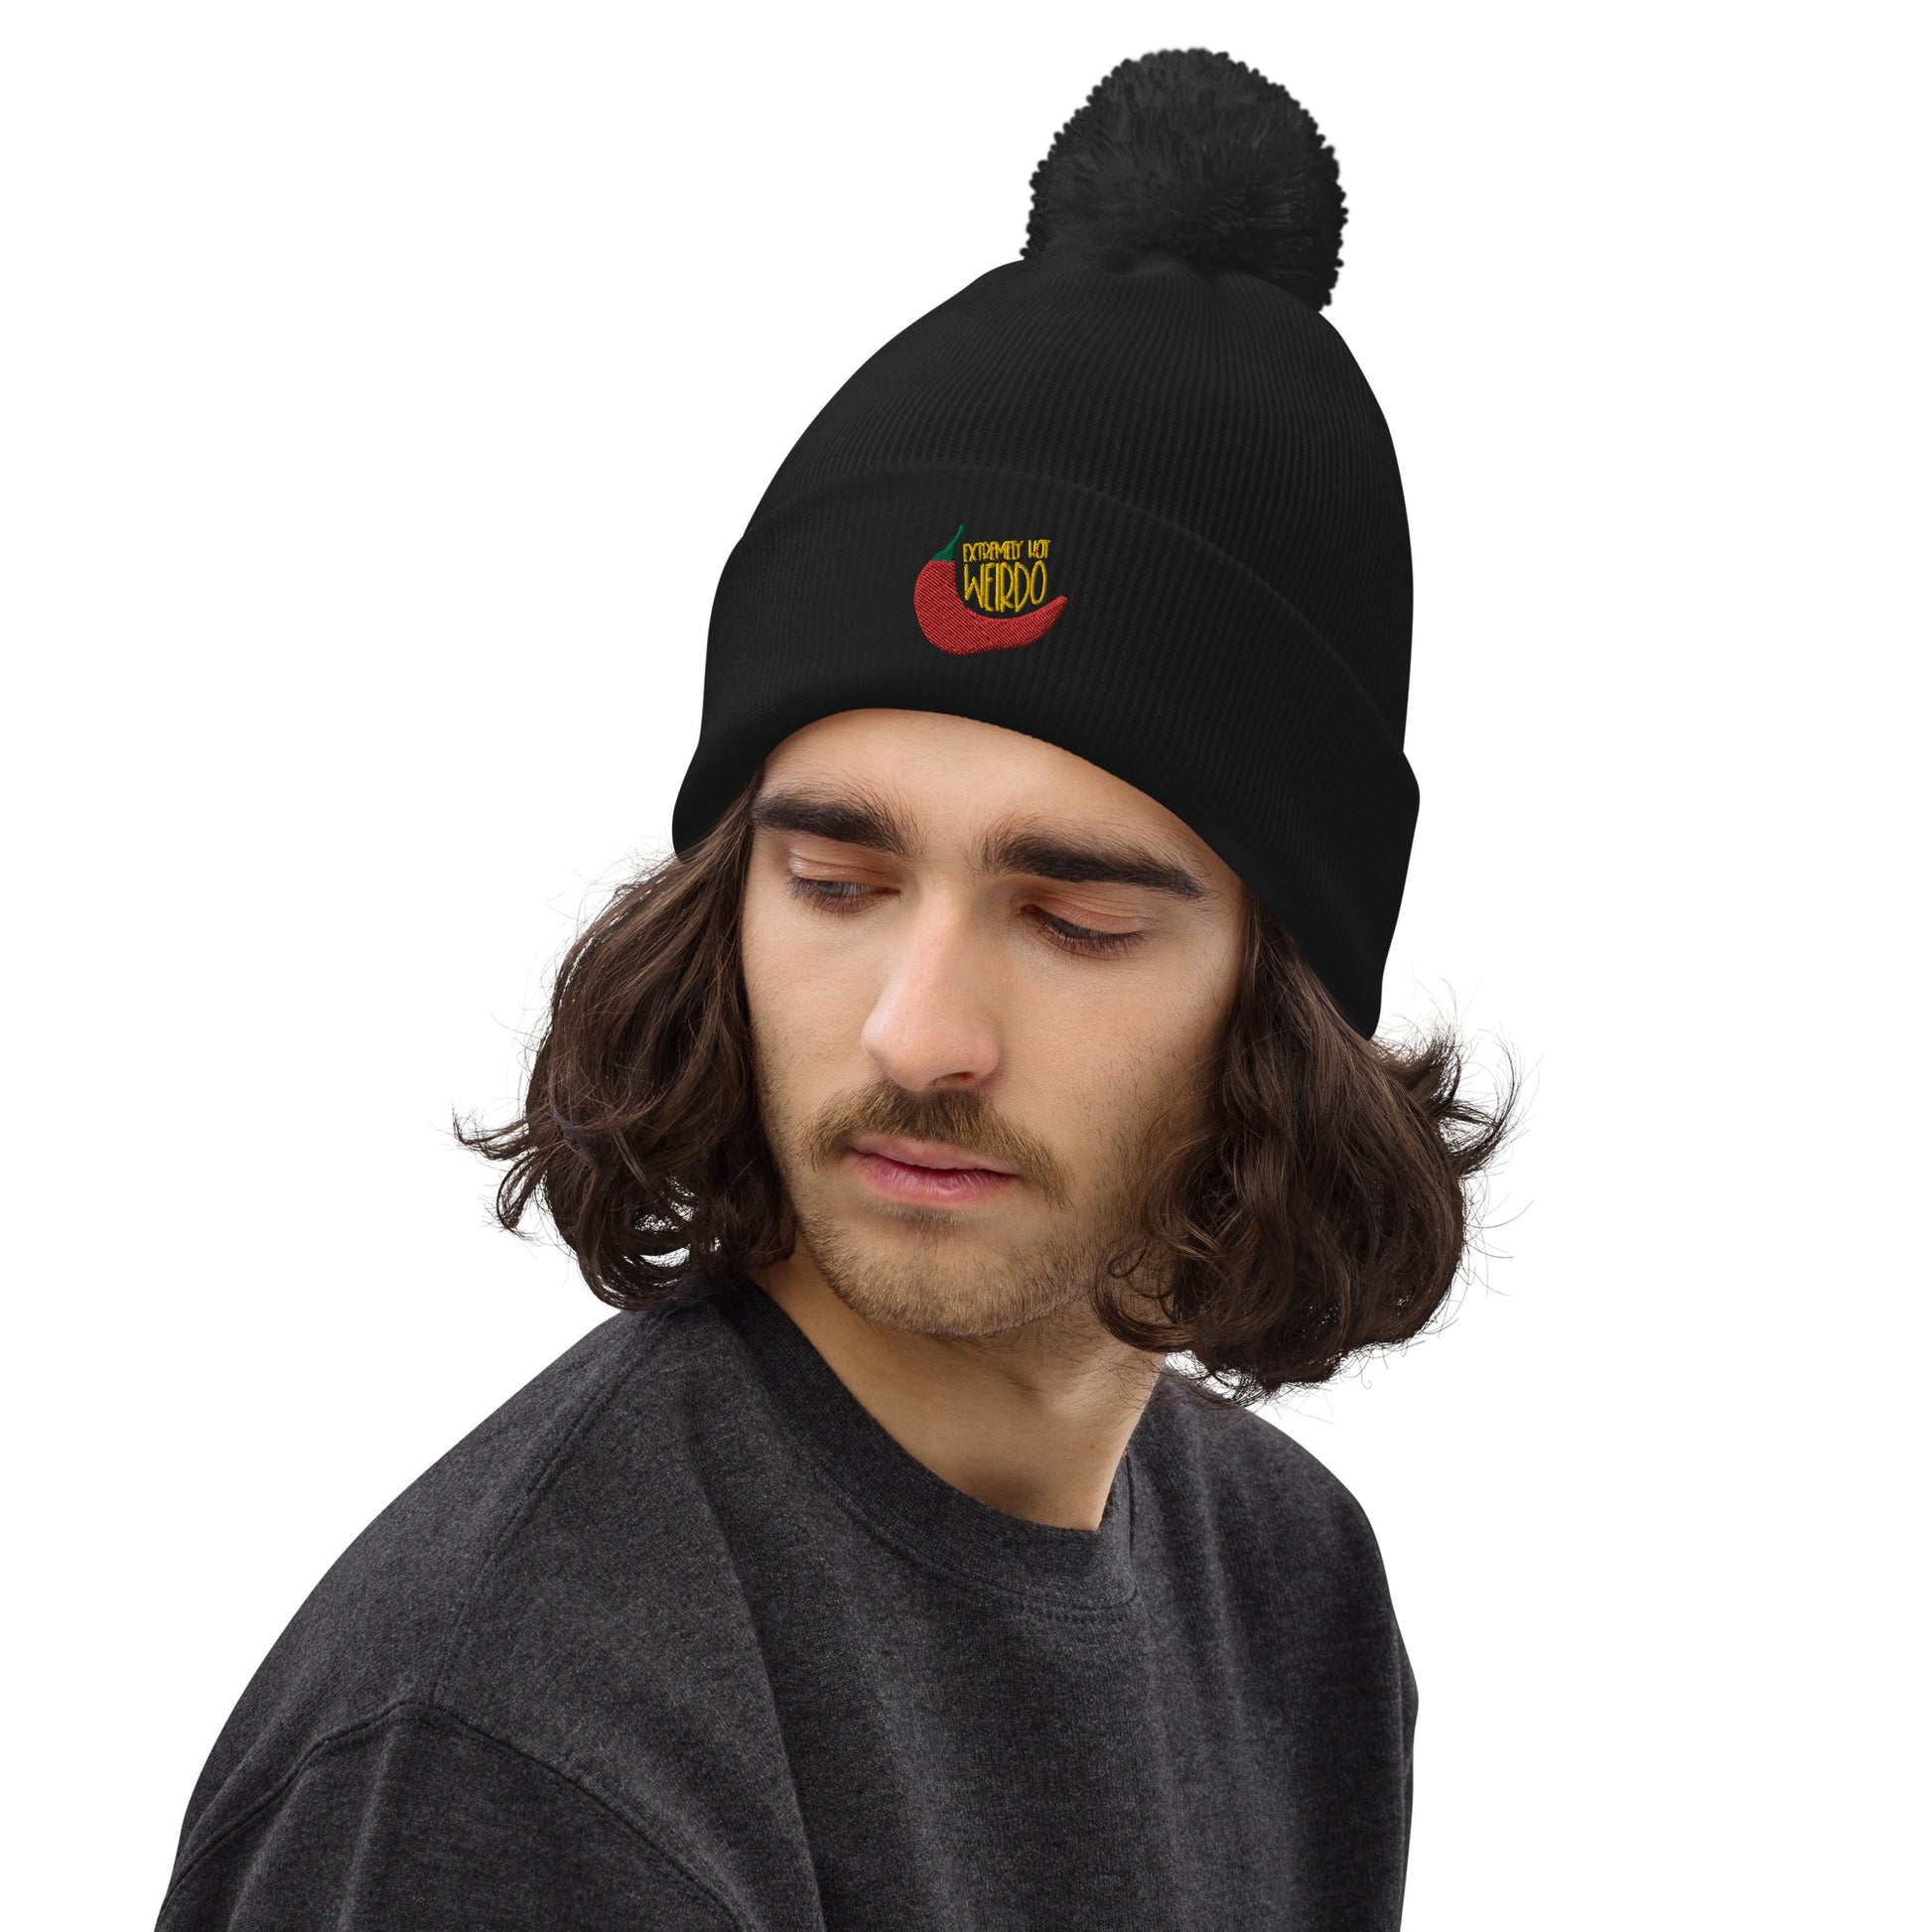 #WEIRDO | Beanie with pom pom for weird men and weird women! This black beanie has the Extremely Hot Weirdo embroidered at the front of the beanie hat. So only if you are weird and extremely hot you can wear this beanie hat!